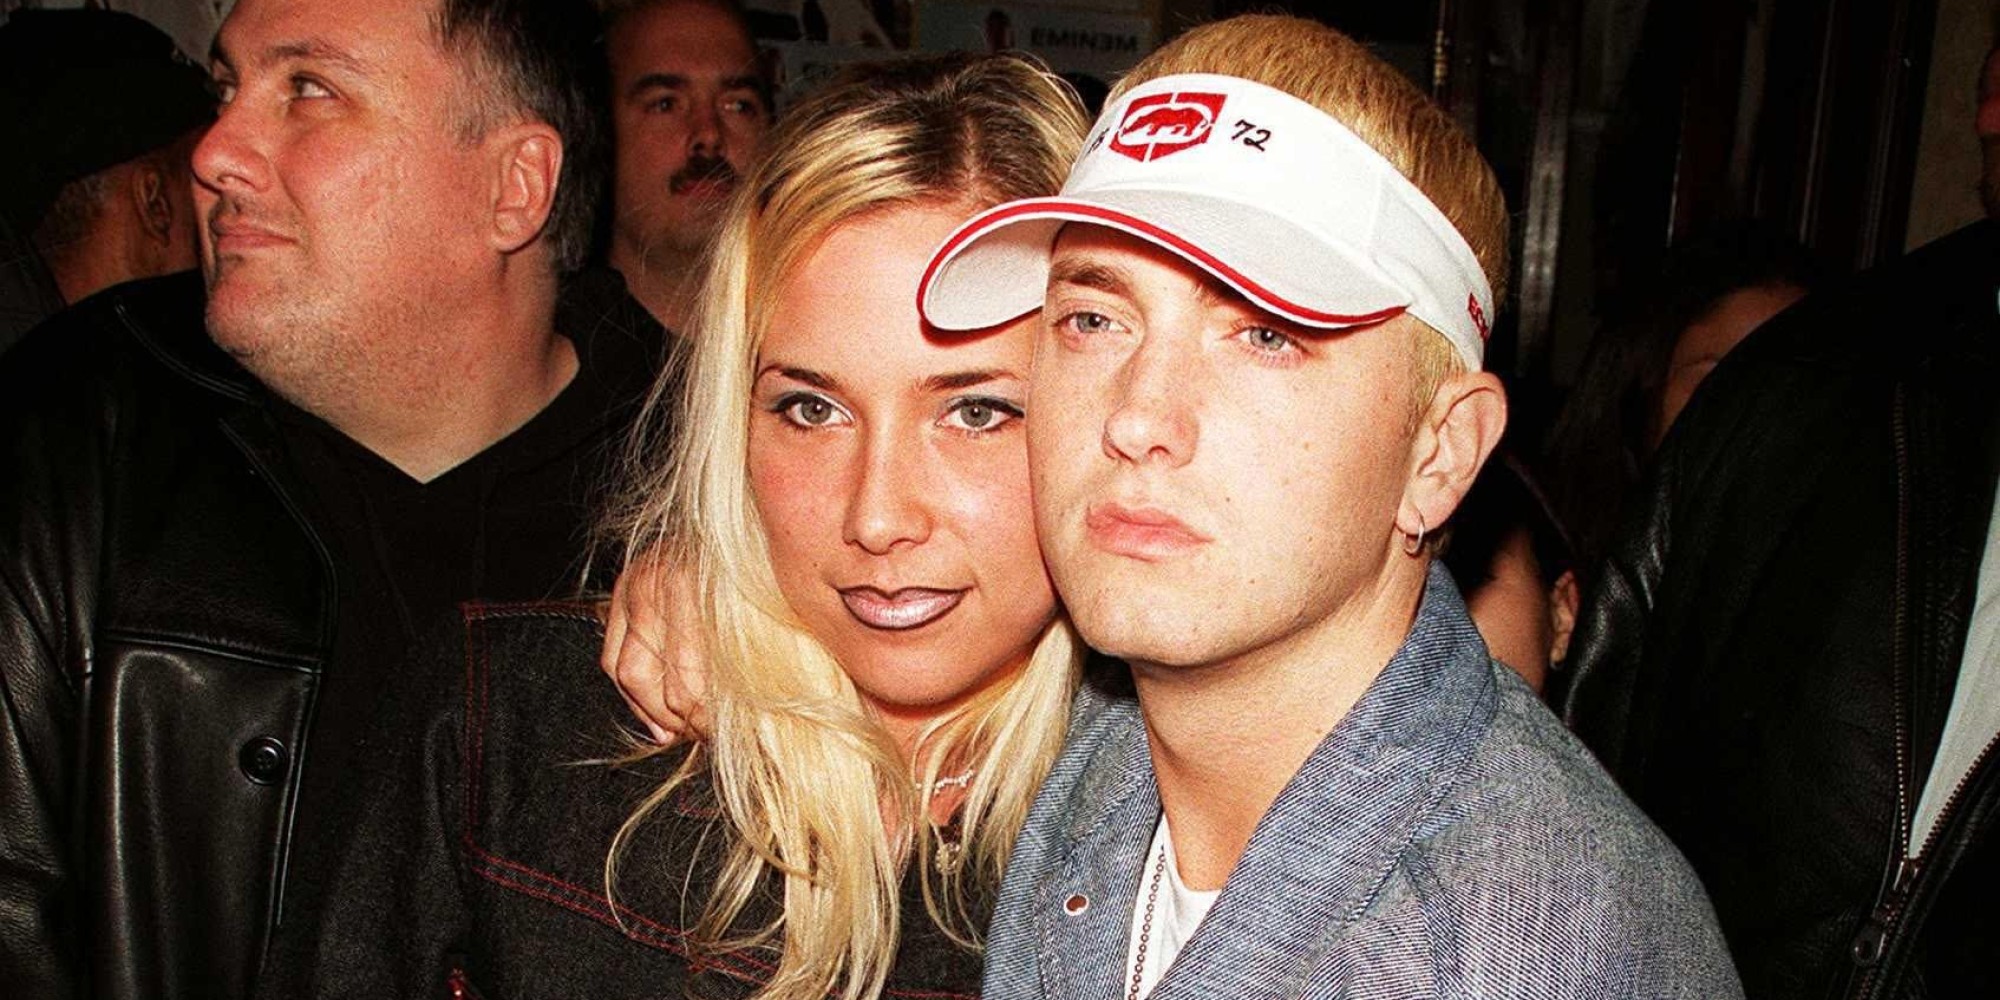 Eminem And Kim Mathers Back Together? Rapper Has Reportedly Reconciled With His Ex2000 x 1000